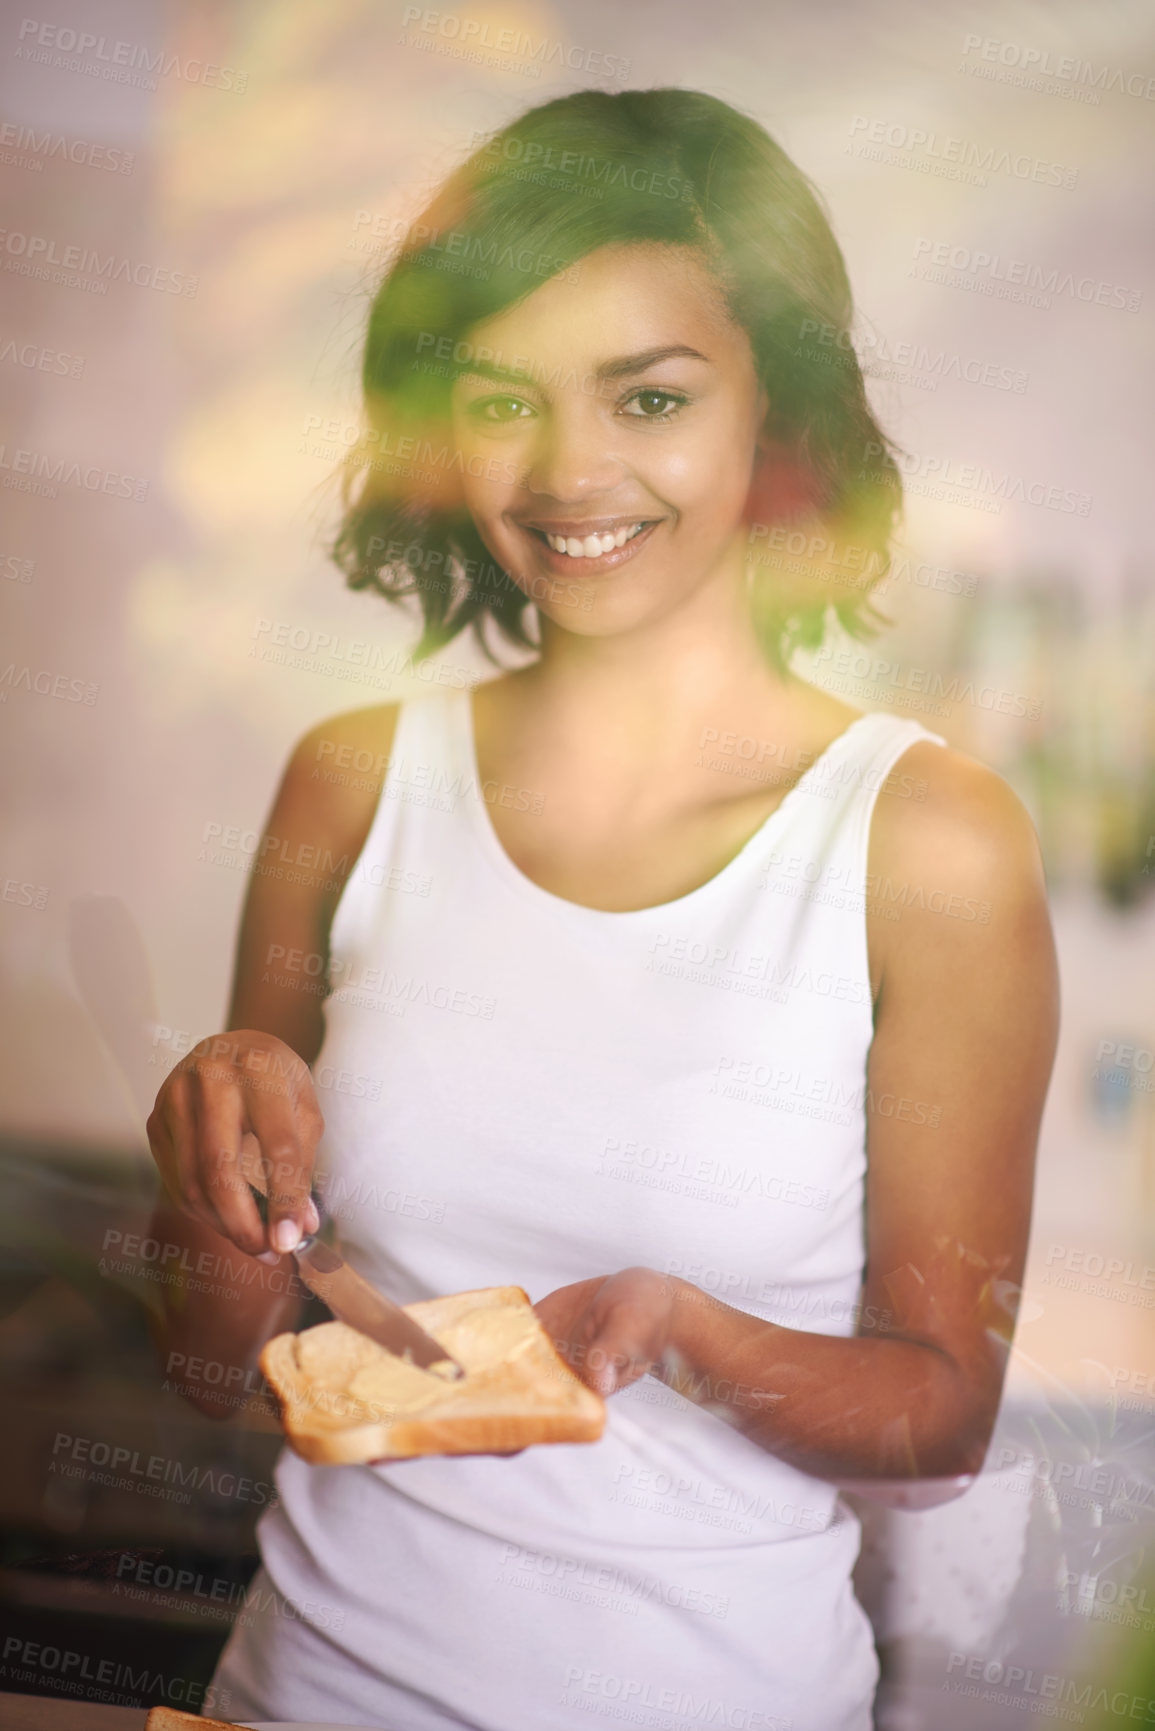 Buy stock photo Shot of a young woman spreading butter onto toast